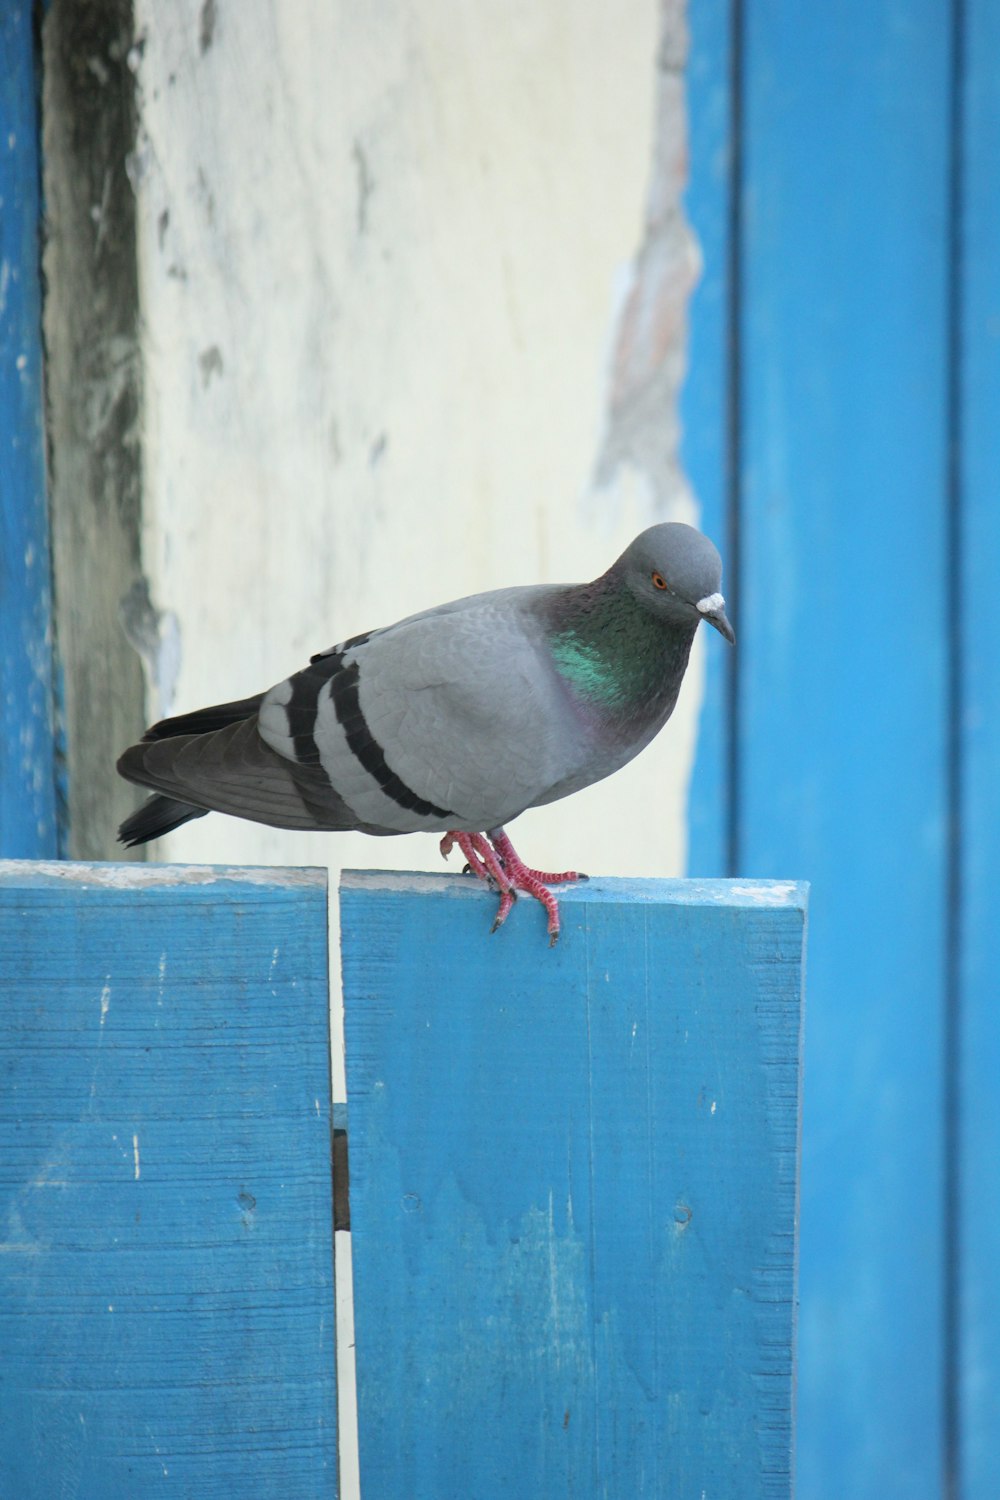 a pigeon is perched on a blue fence